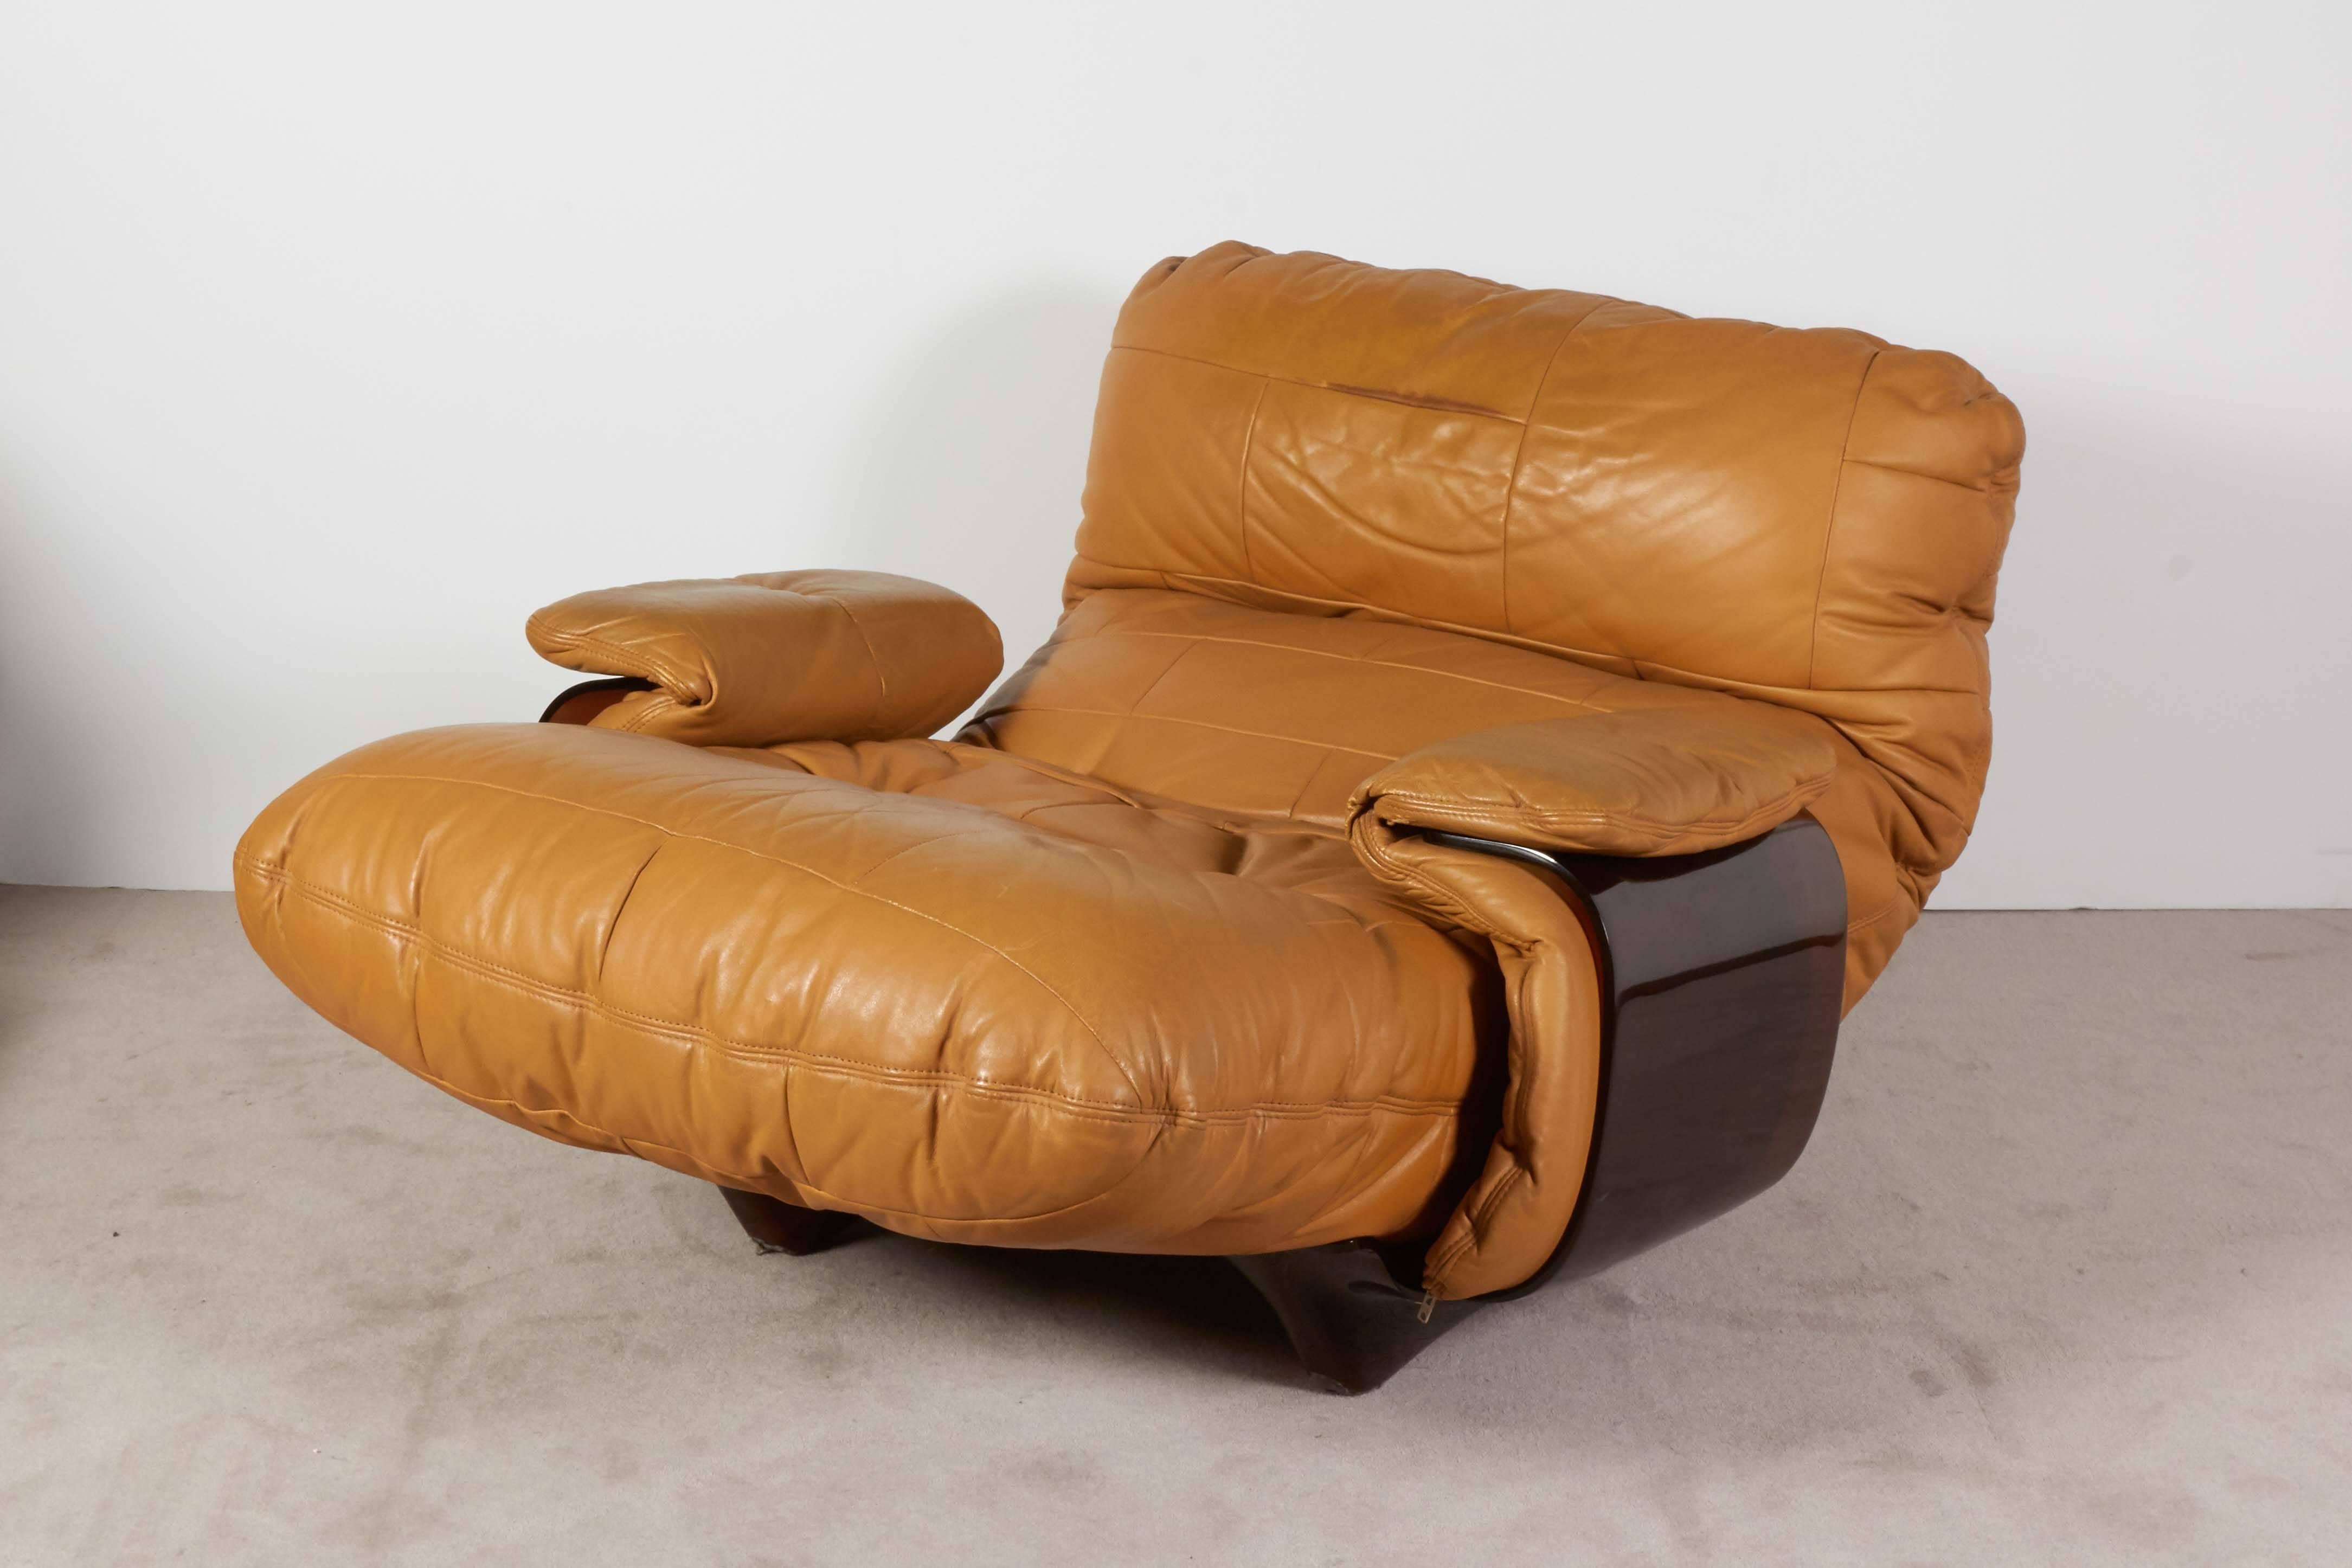 A French, circa 1970s lounge chair and matching ottoman from the 'Marsala' series by Michel Ducaroy, manufactured by Ligne Roset, upholstered in cognac colored leather, against brown plexiglass bases. Markings include original sticker [Roset/Made in